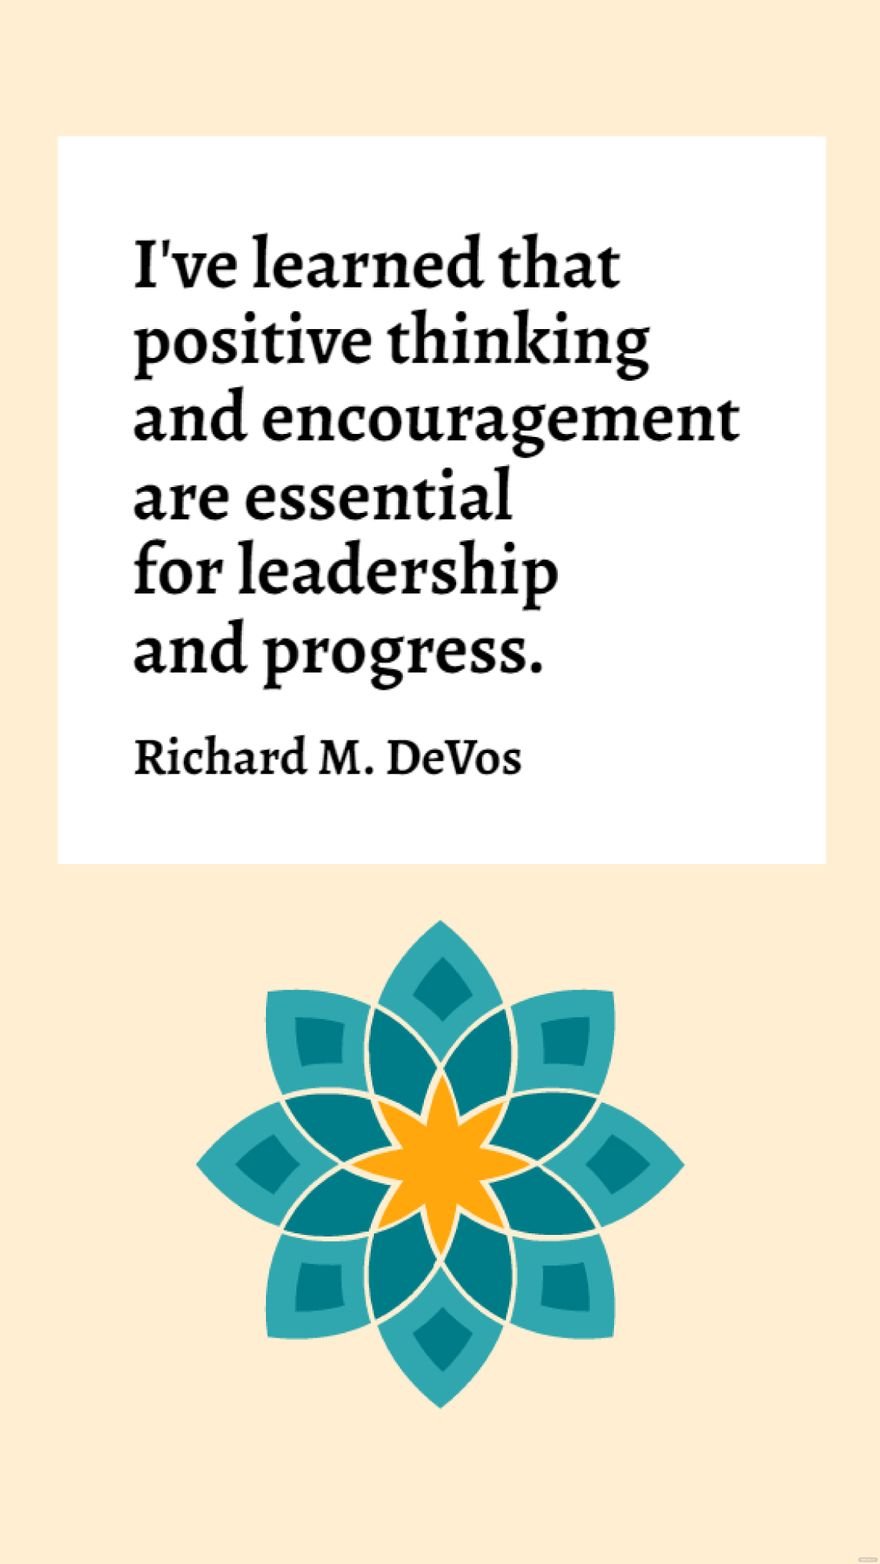 Richard M. DeVos - I've learned that positive thinking and encouragement are essential for leadership and progress. in JPG